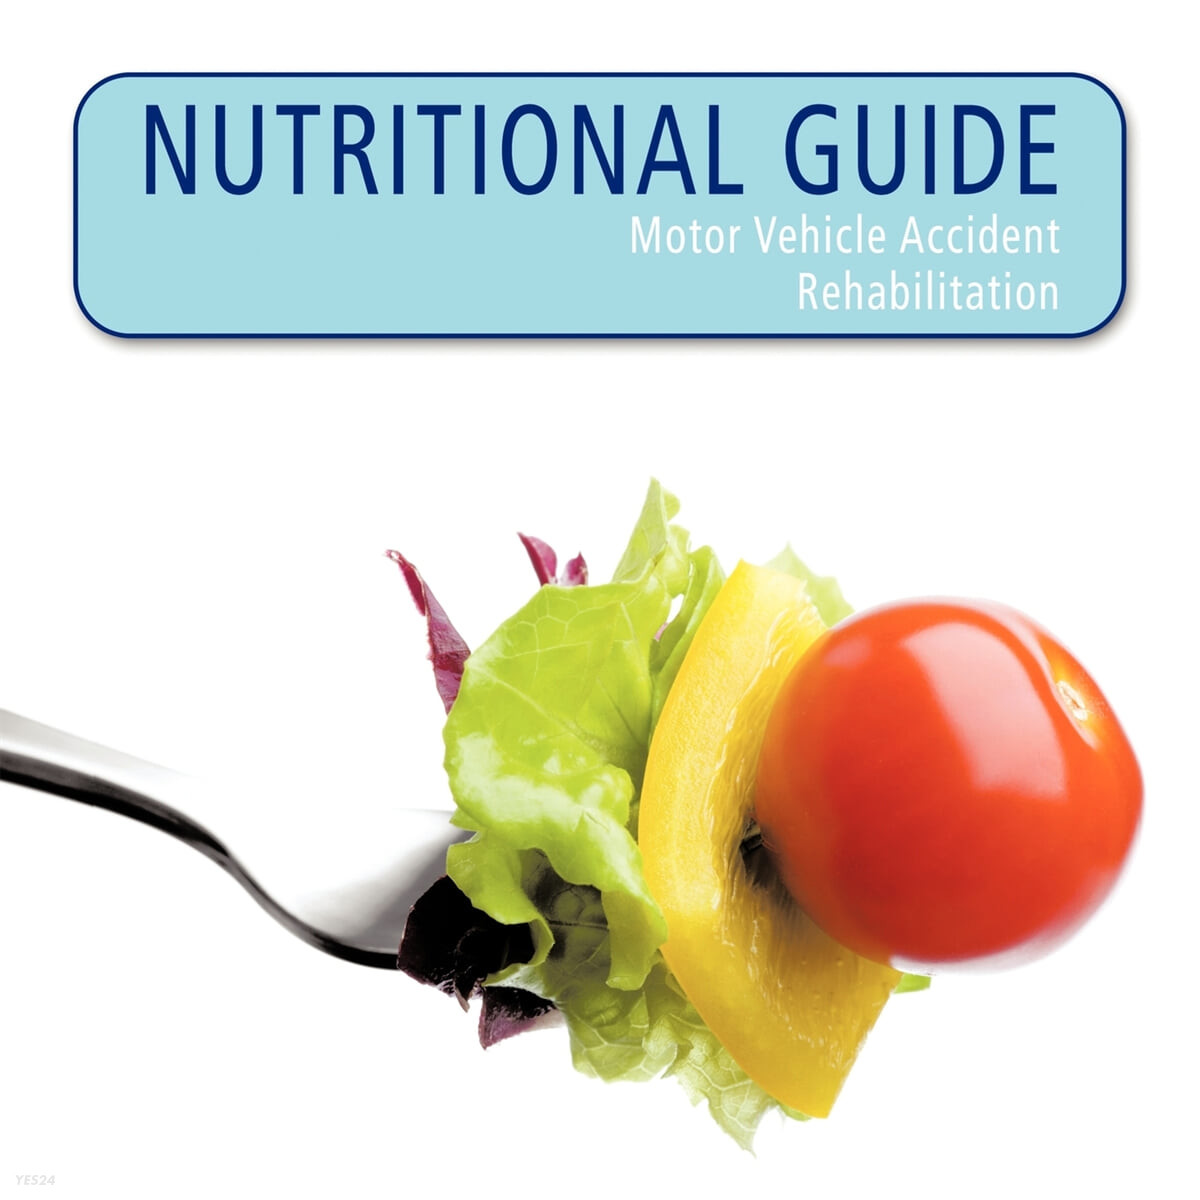 NUTRITIONAL GUIDE (Motor Vehicle Accident Rehabilitation)